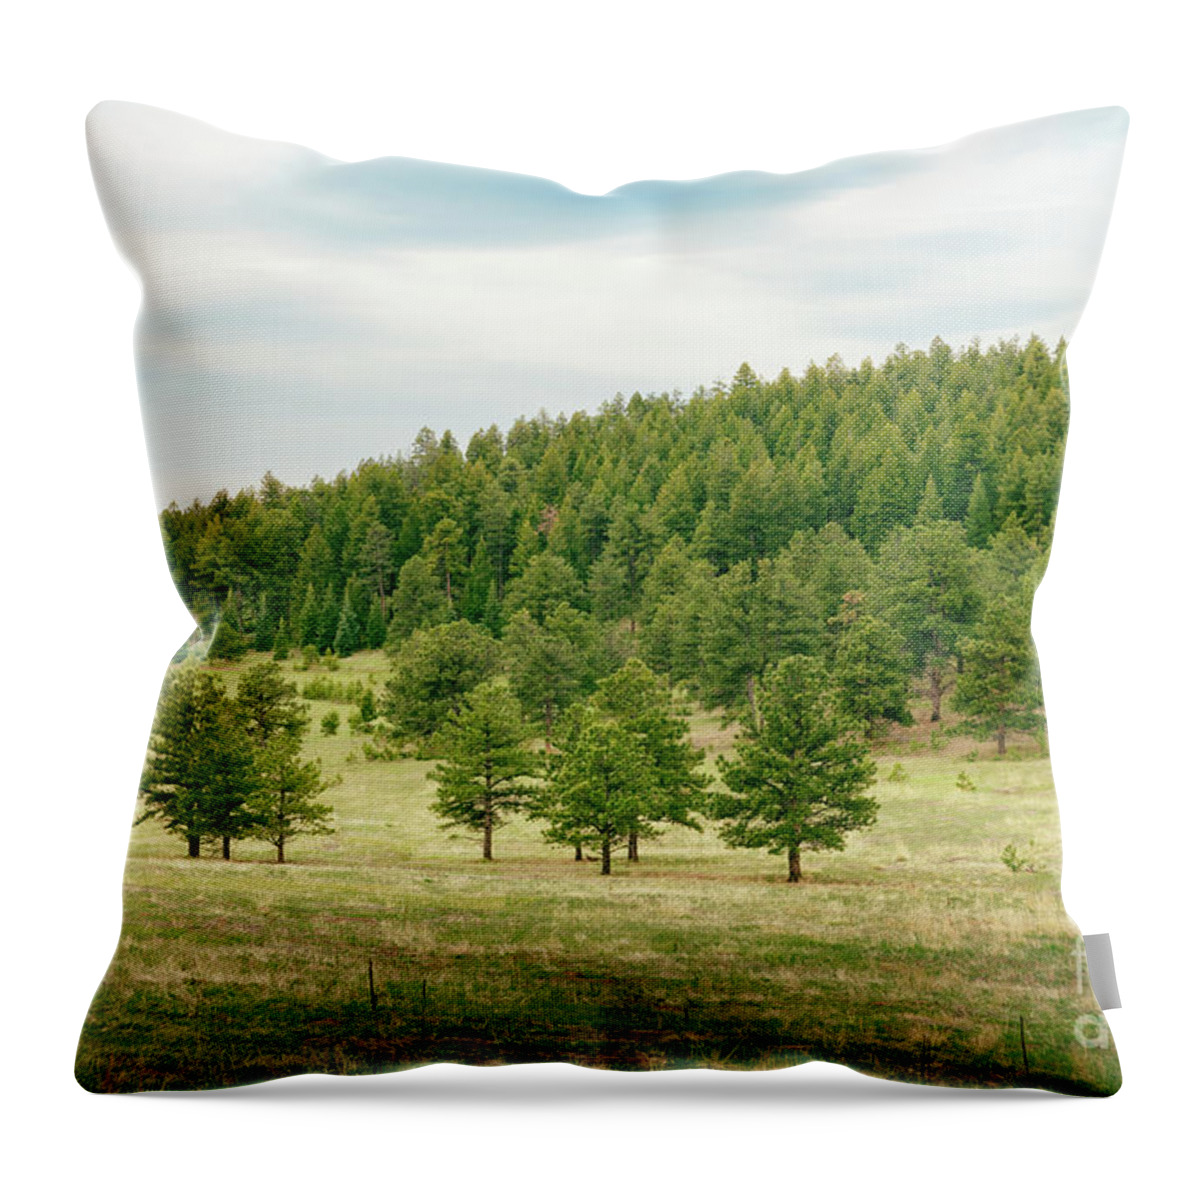 Green Throw Pillow featuring the photograph Peaceful Greens by Ana V Ramirez